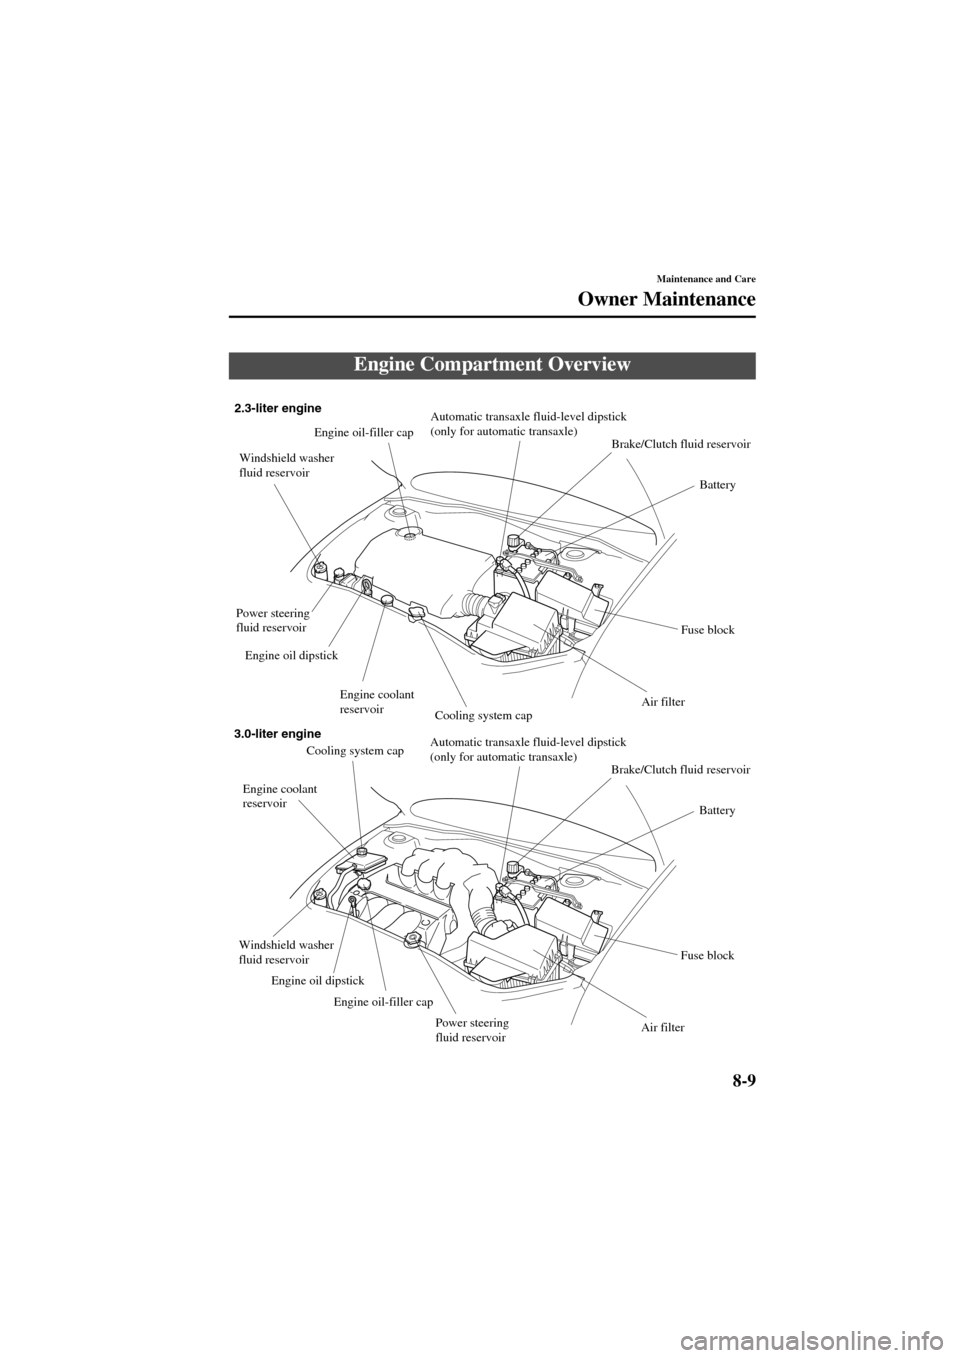 MAZDA MODEL 6 2004   (in English) Owners Guide 8-9
Maintenance and Care
Owner Maintenance
Form No. 8R29-EA-02I
Engine Compartment Overview
Automatic transaxle fluid-level dipstick
(only for automatic transaxle) 
Cooling system cap Power steering 
